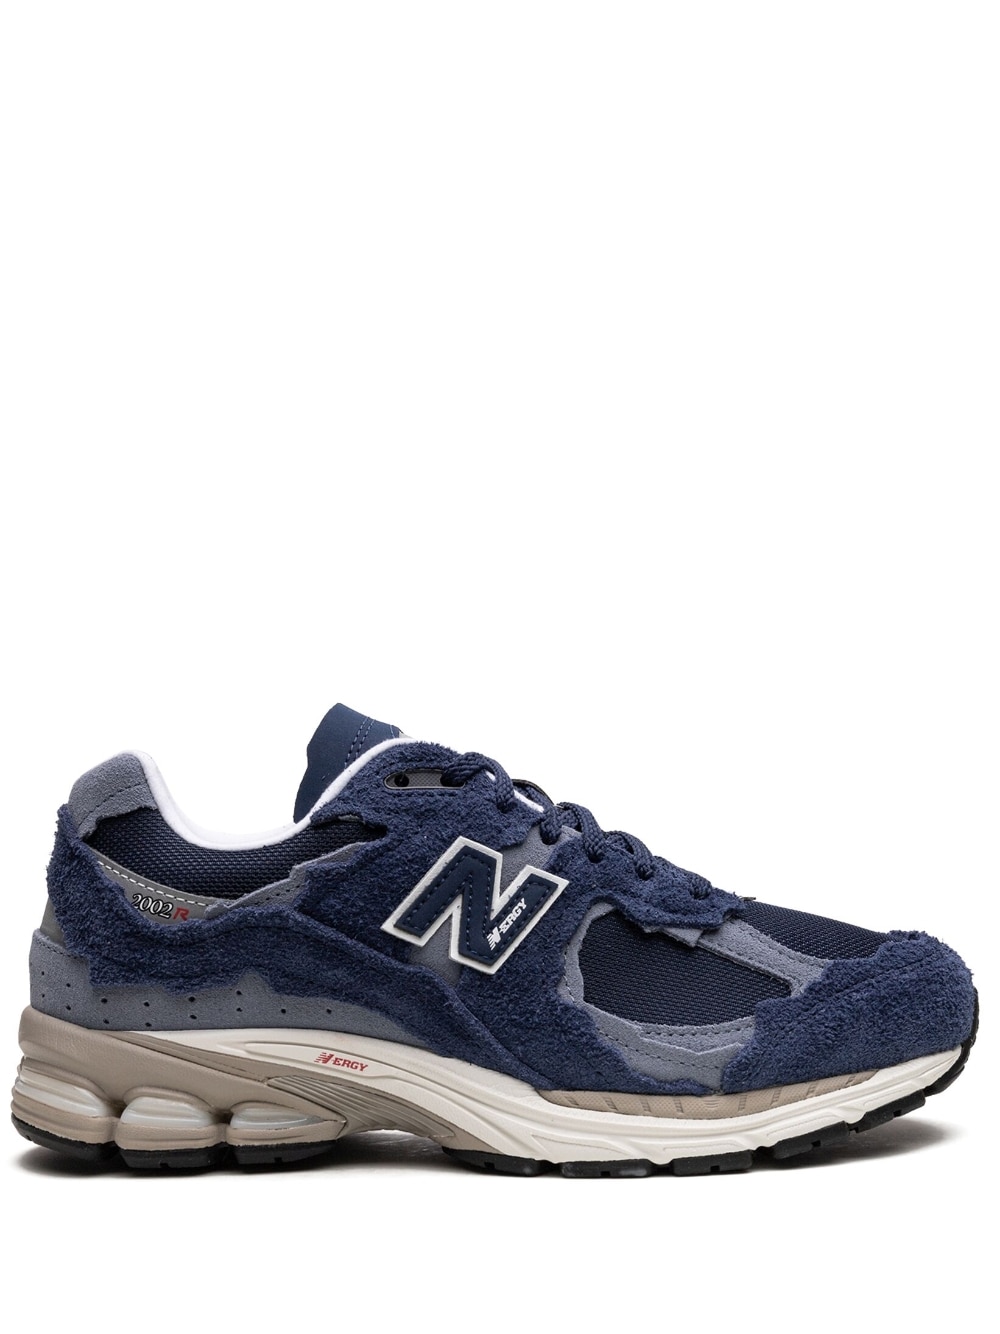 New Balance 2002RD "Navy/Grey" sneakers - Blue